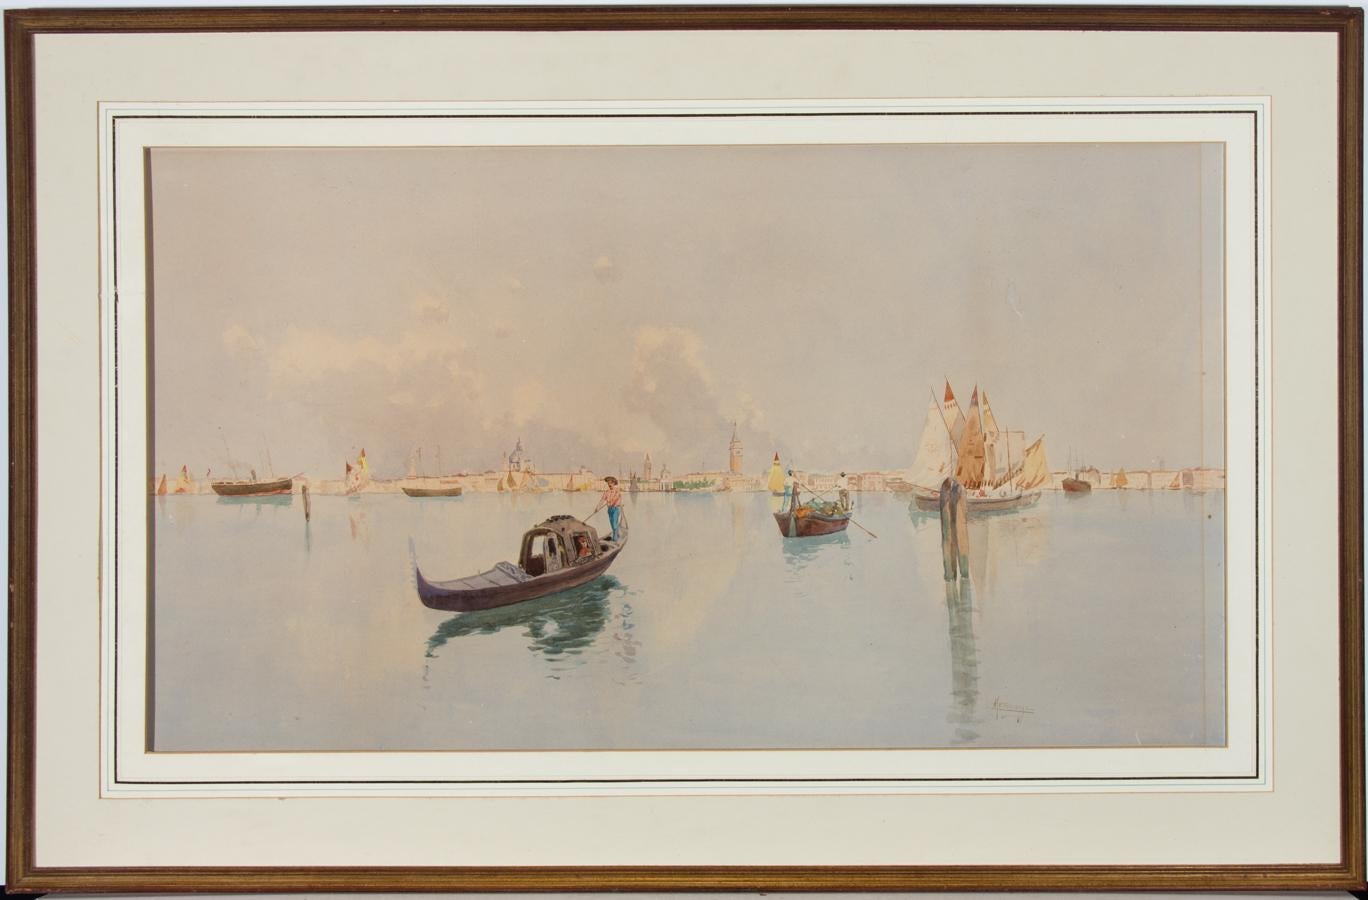 A fine late 19th or early 20th century watercolour by the Italian artist Carlo Menegazzi. Here Menegazzi has captured the Venetian Lagoon, with the city visible on the horizon. The Lagoon stretches from the River Sile in the north to the Brenta in